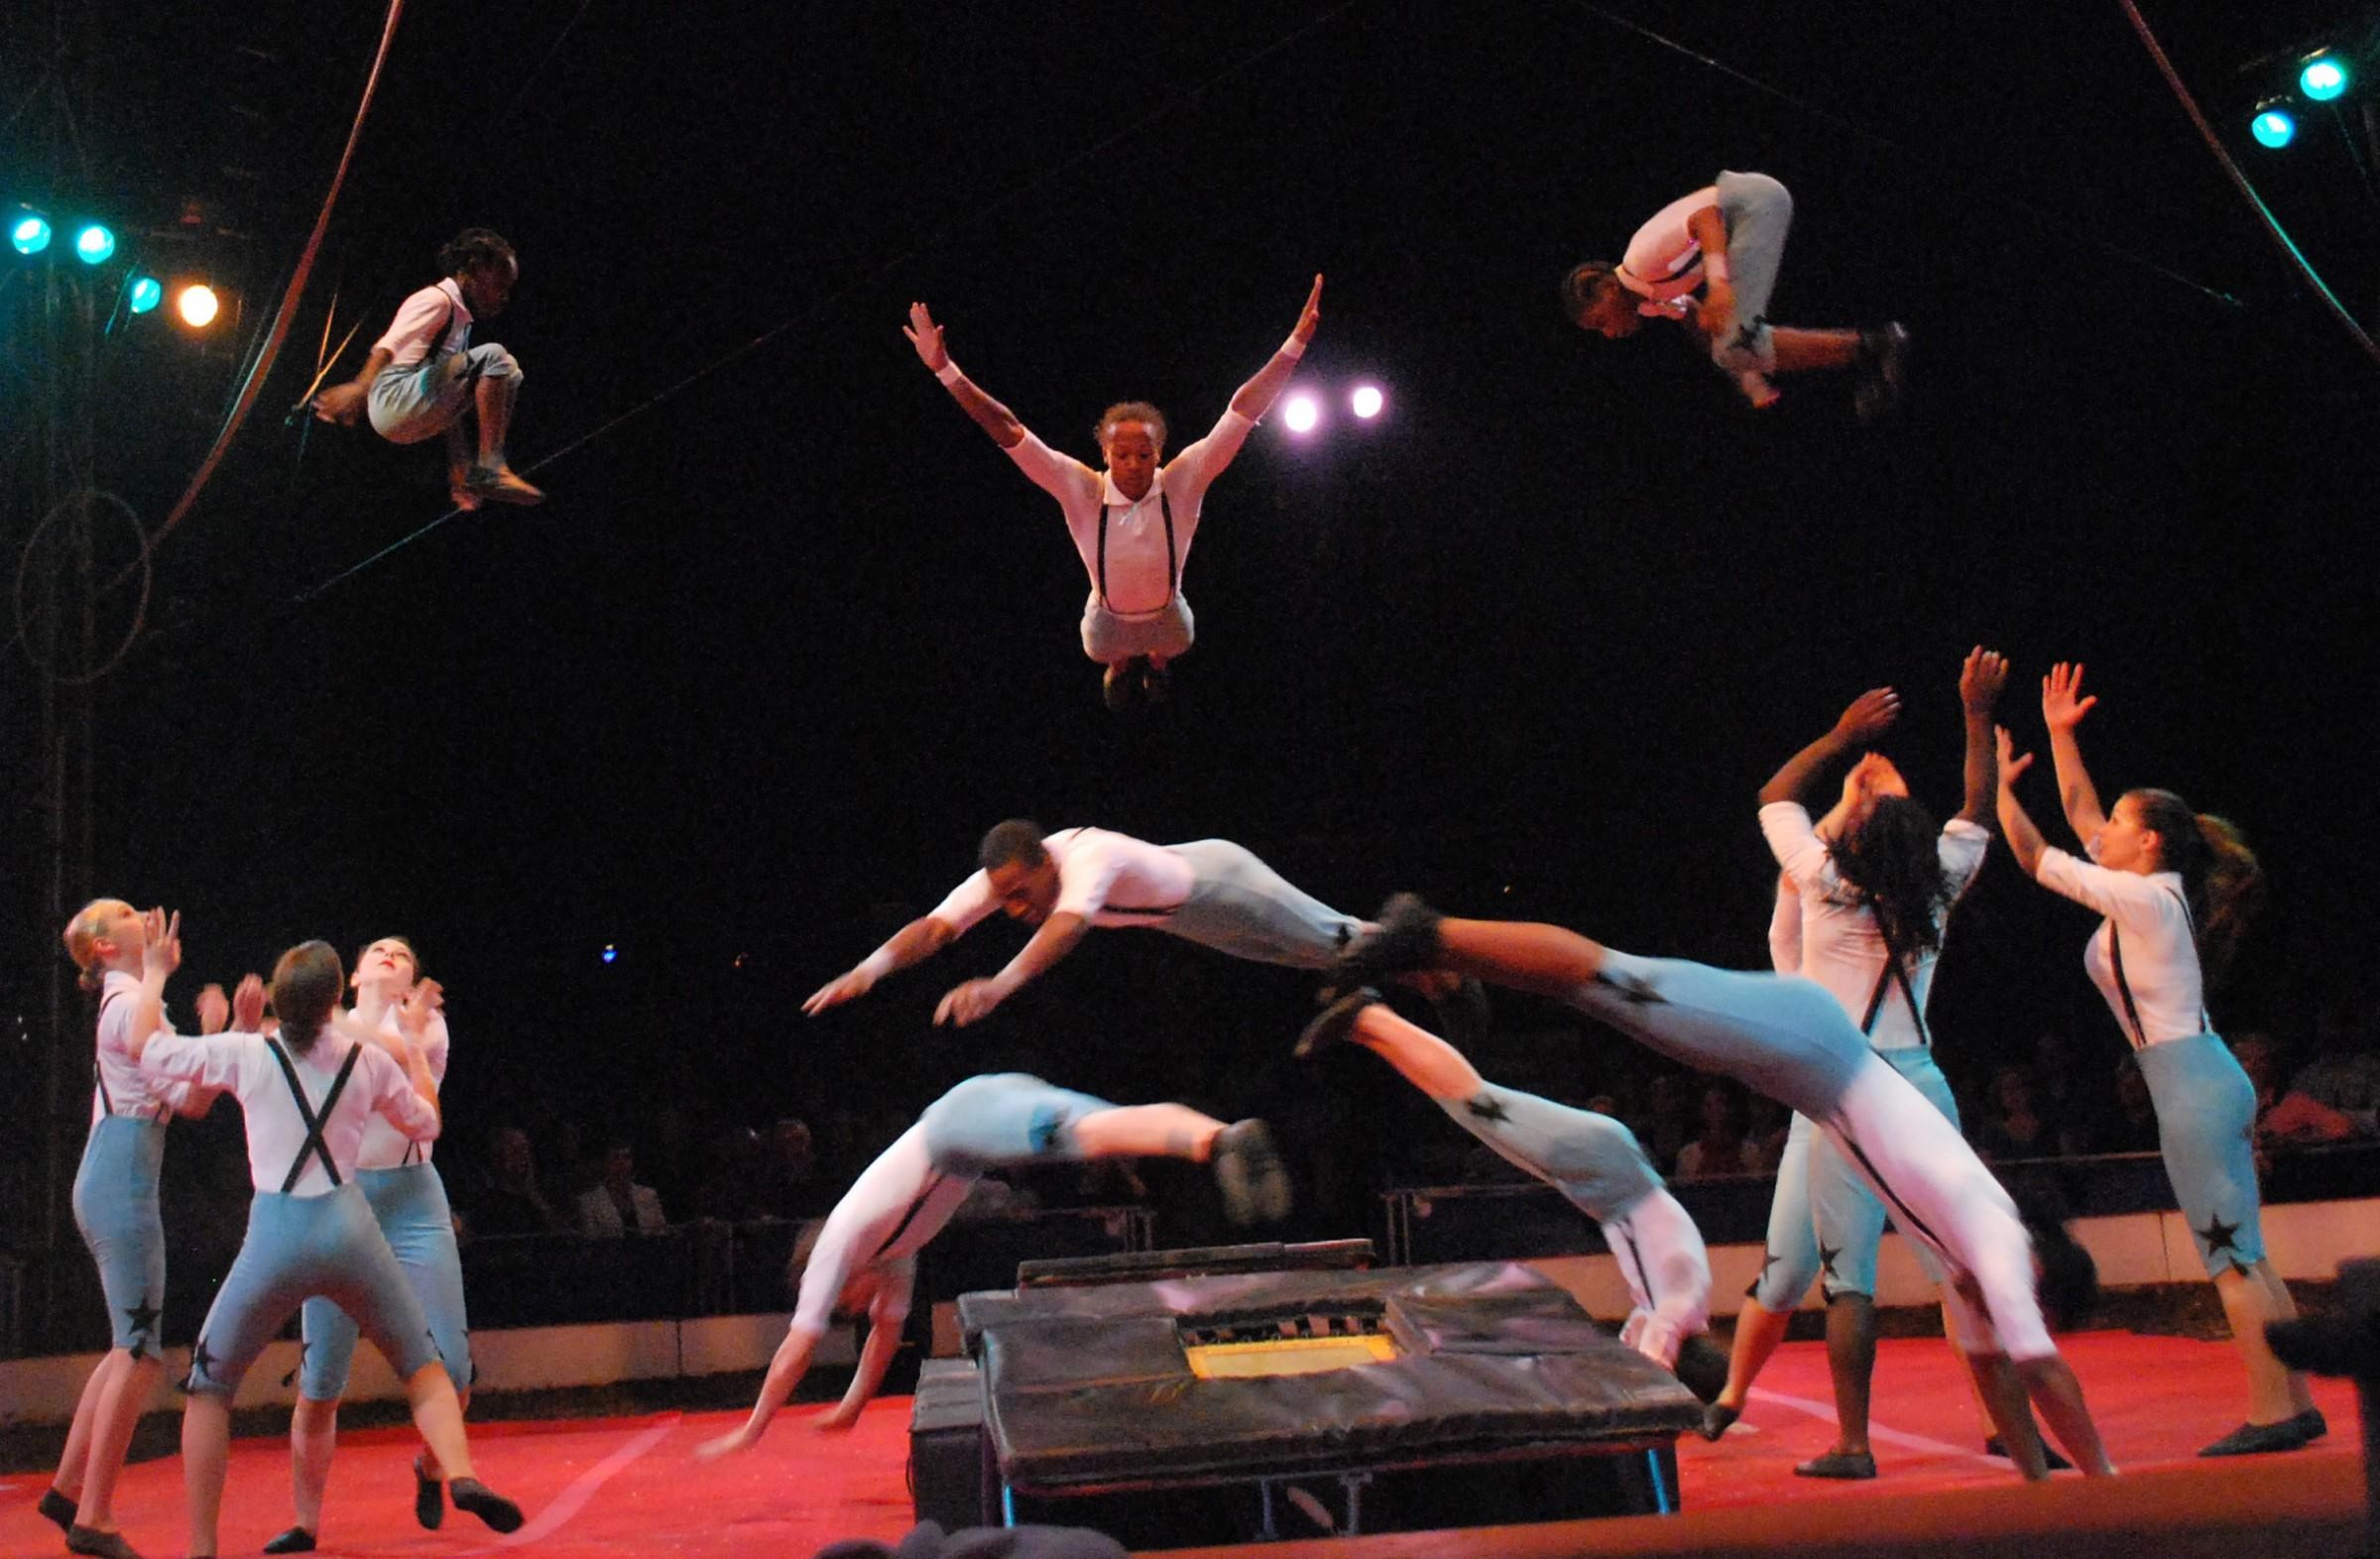 flipping acrobats in circus show